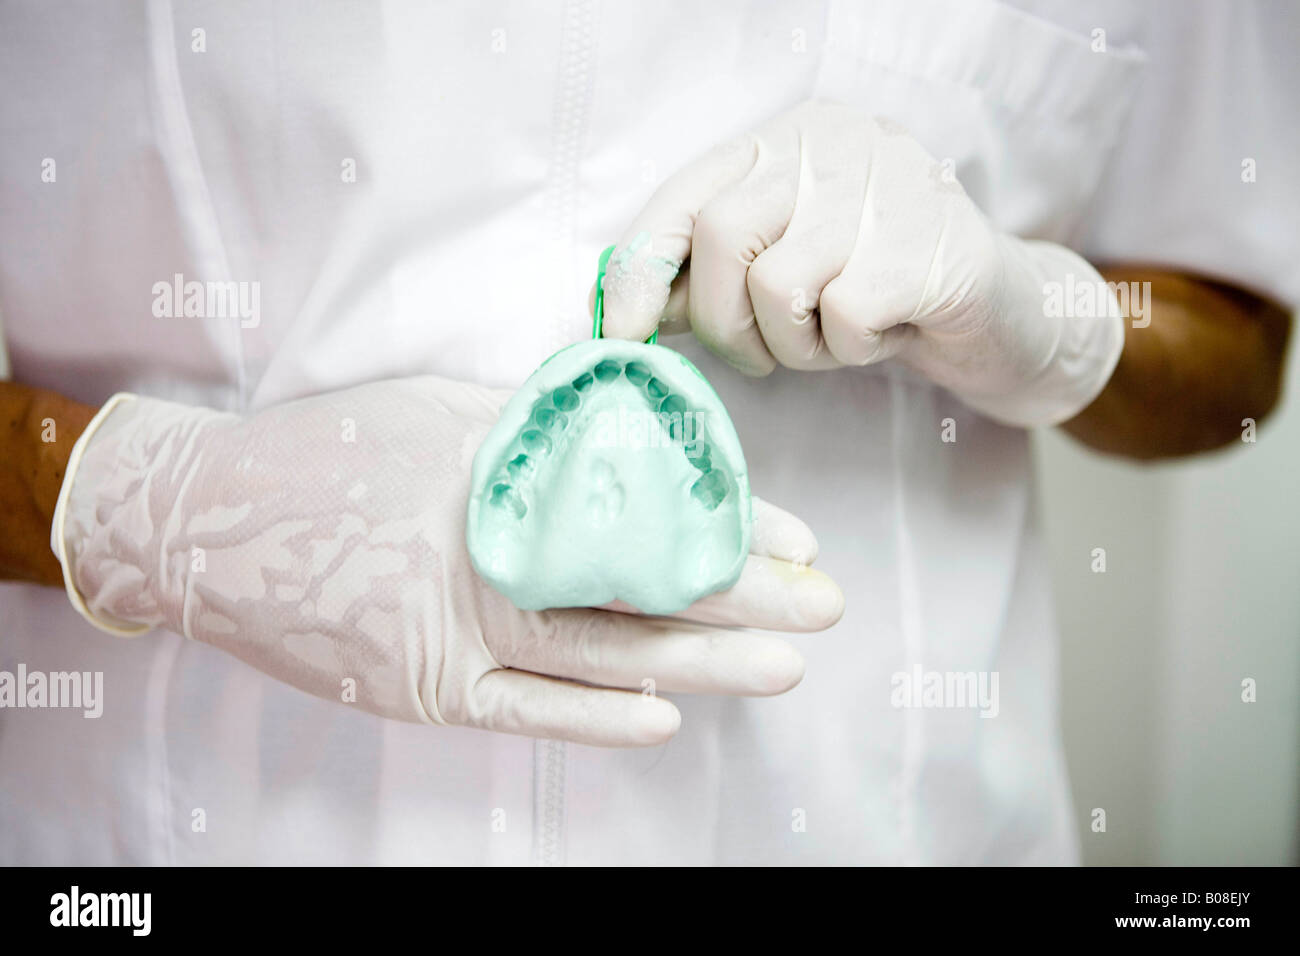 947 Dental Mold Stock Photos, High-Res Pictures, and Images - Getty Images